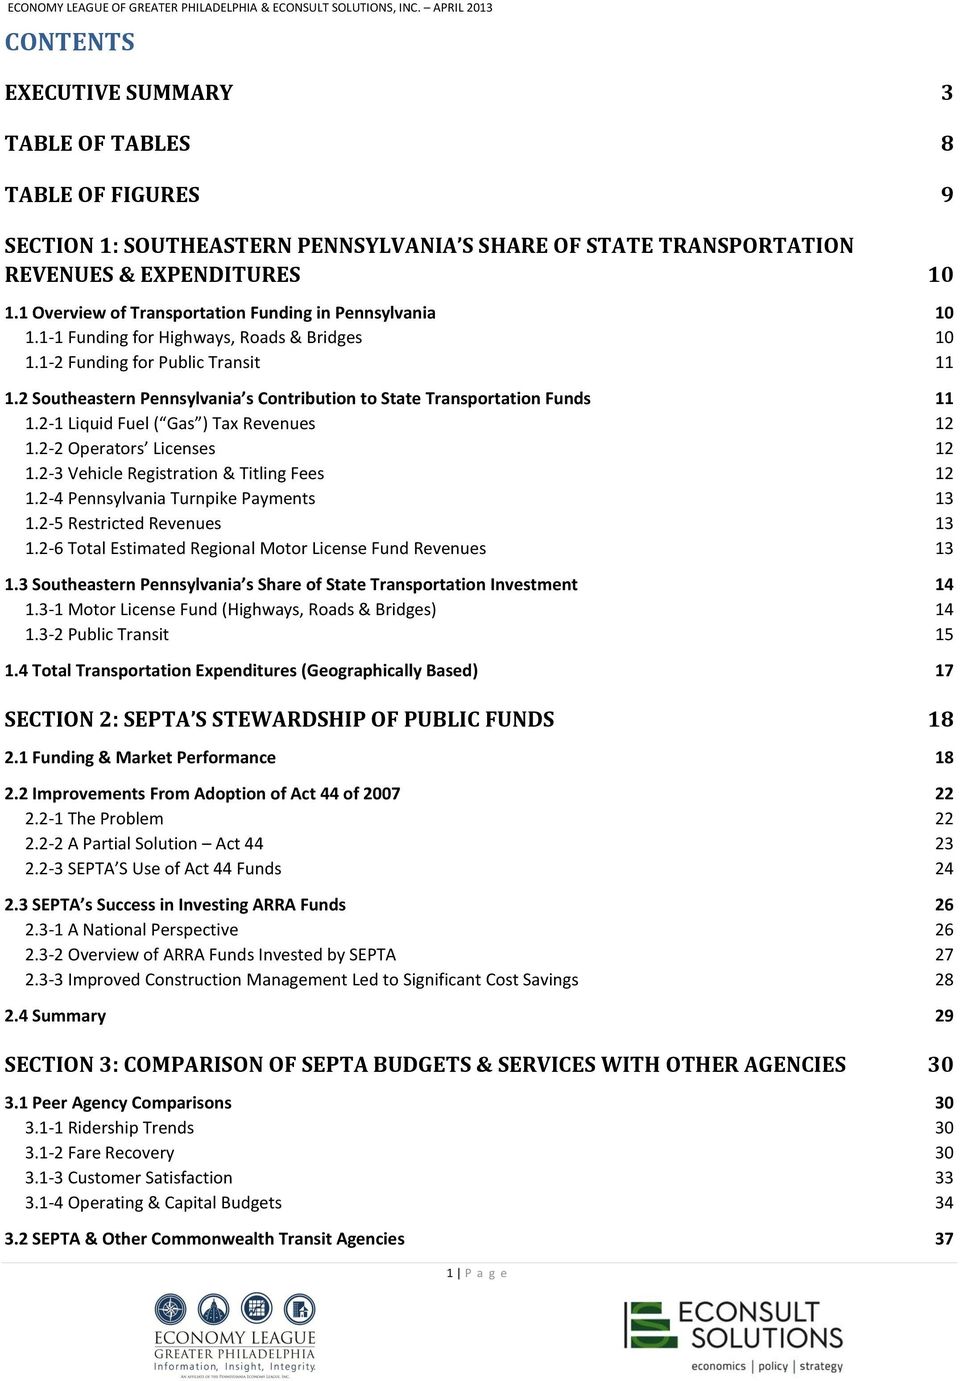 2 Southeastern Pennsylvania s Contribution to State Transportation Funds 11 1.2-1 Liquid Fuel ( Gas ) Tax Revenues 12 1.2-2 Operators Licenses 12 1.2-3 Vehicle Registration & Titling Fees 12 1.